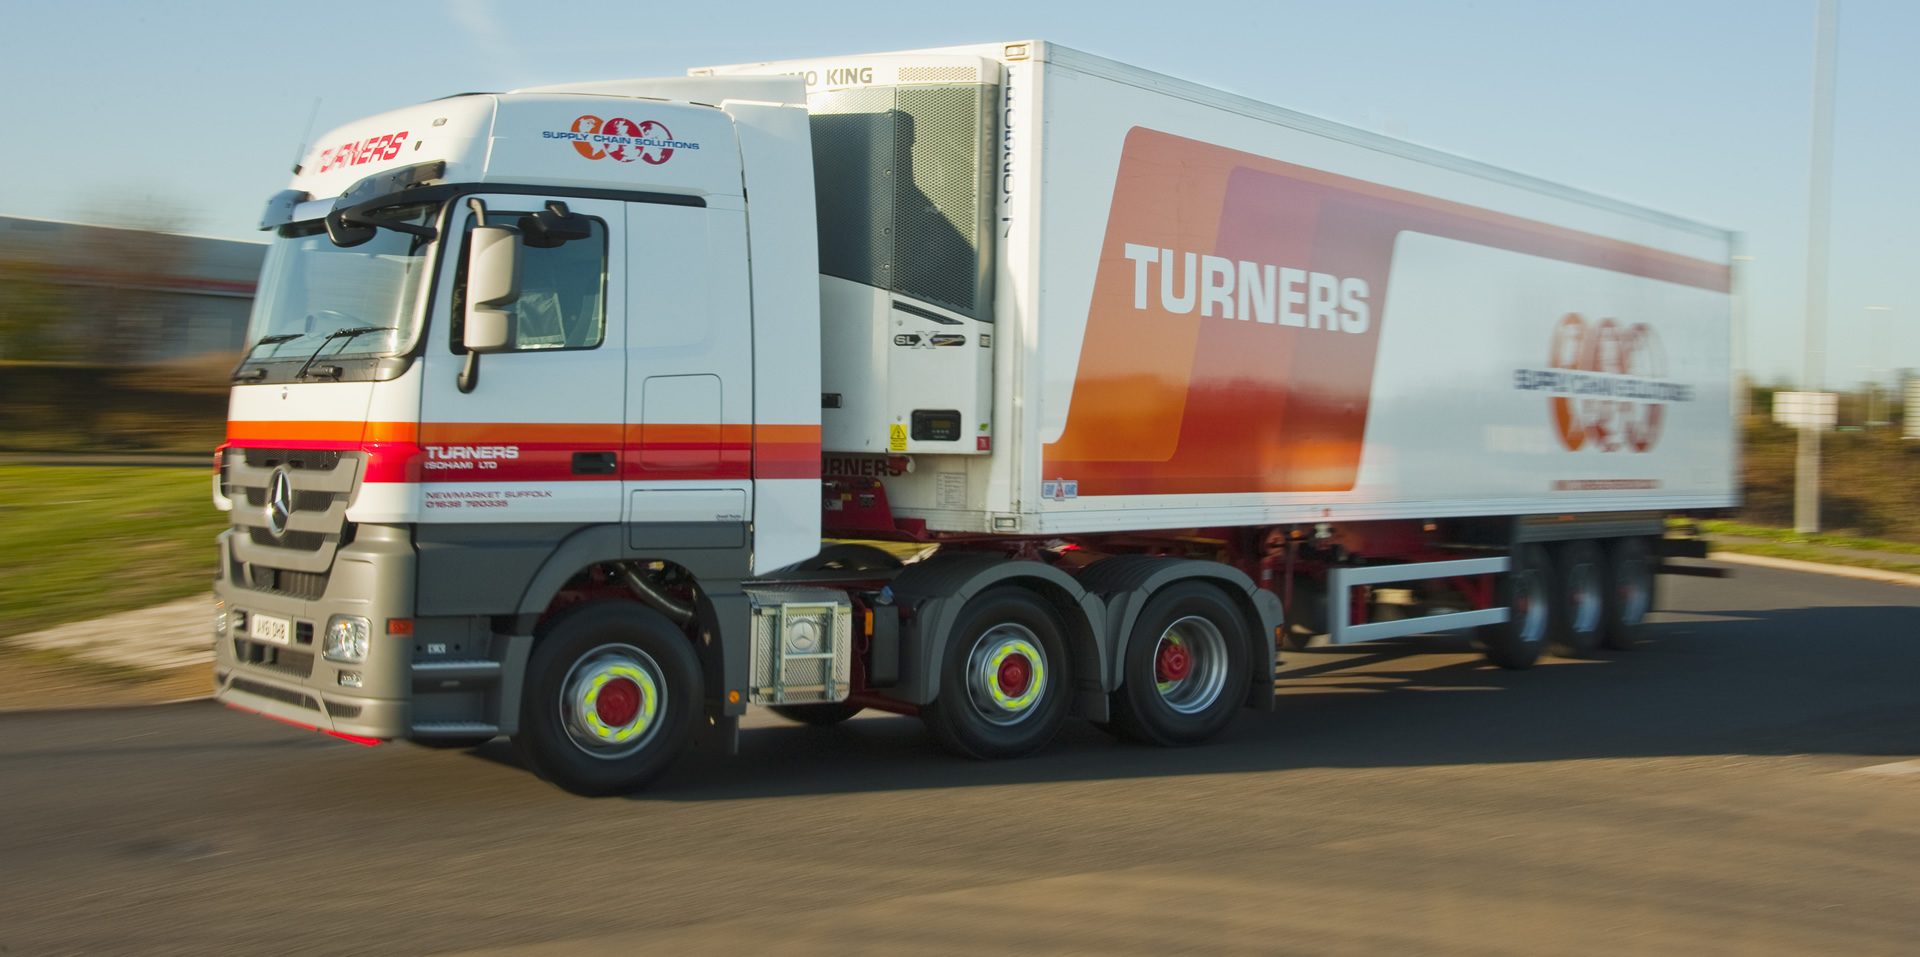 Turners Lorry on the road